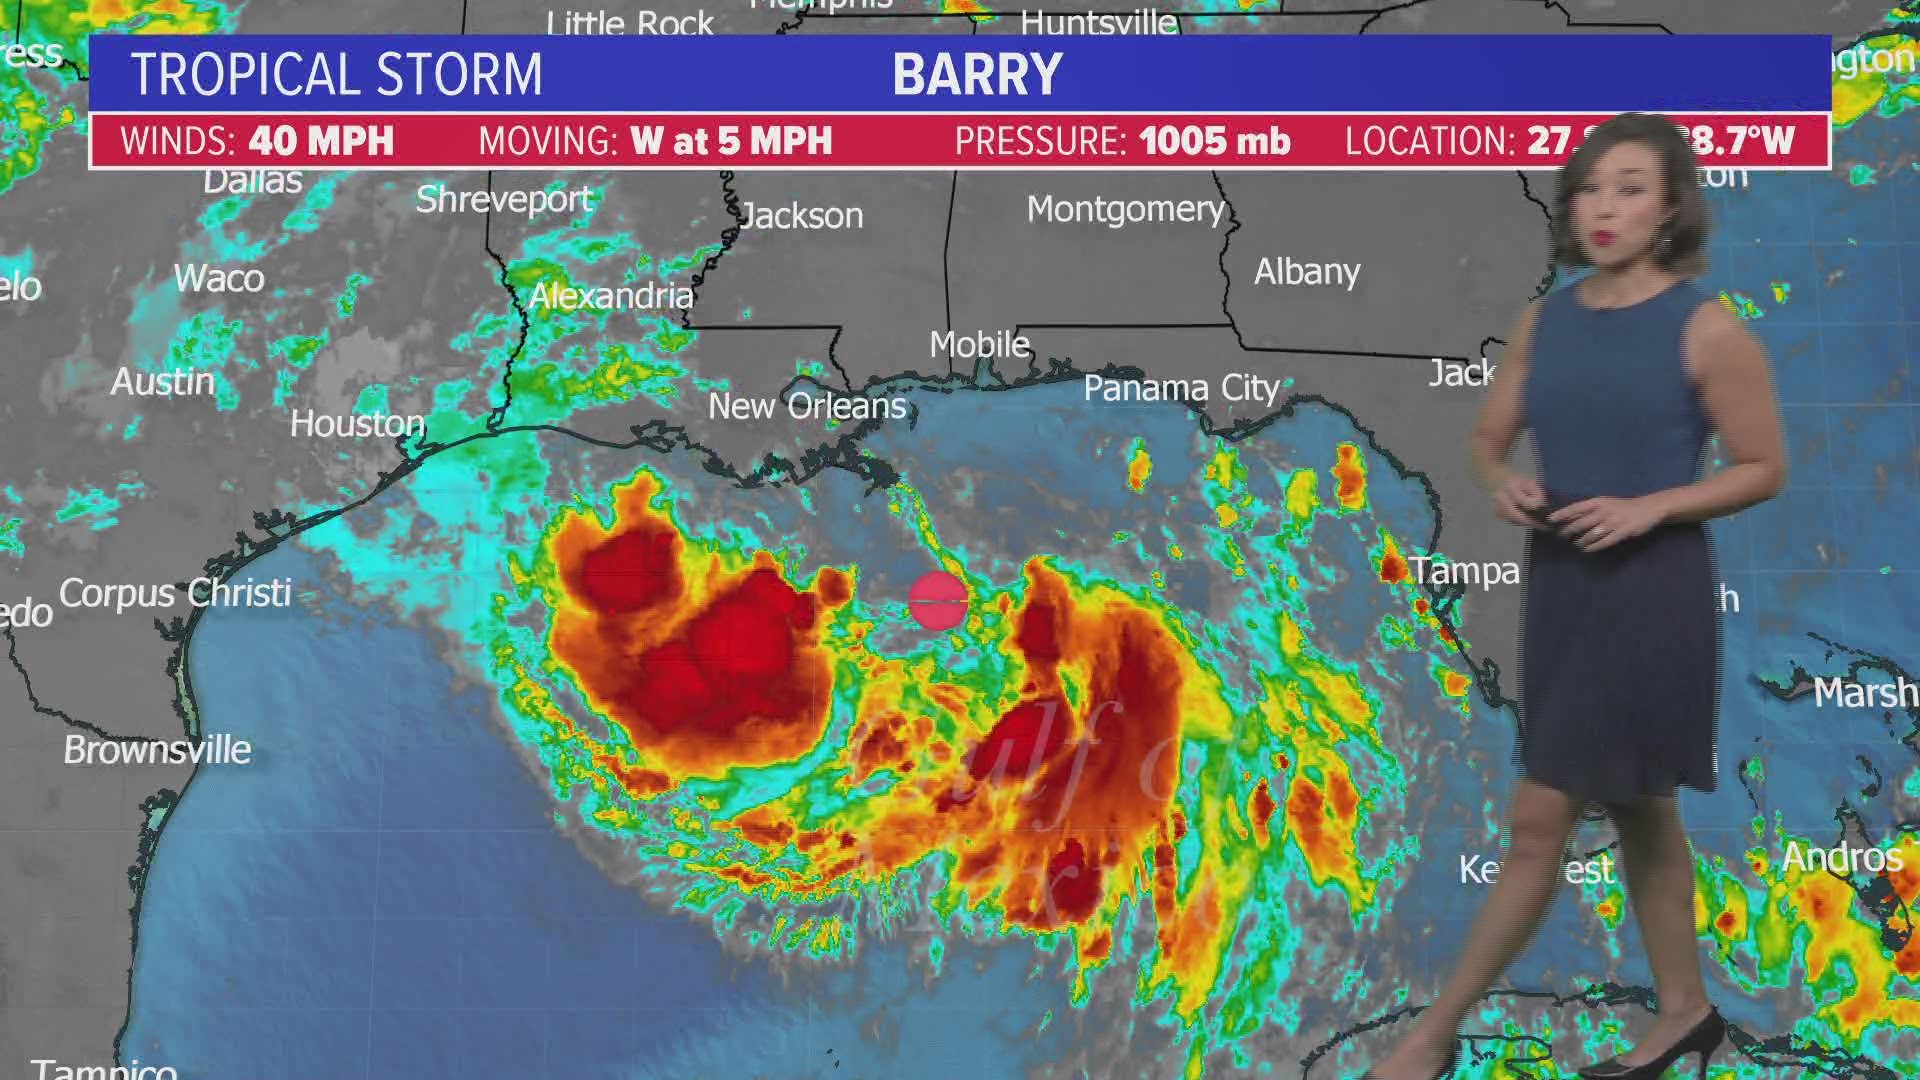 As of 1 p.m., Tropical Storm Barry has sustained winds of 40 mph. Barry is expected to become a Category 1 Hurricane making landfall Saturday along the Louisiana coast.